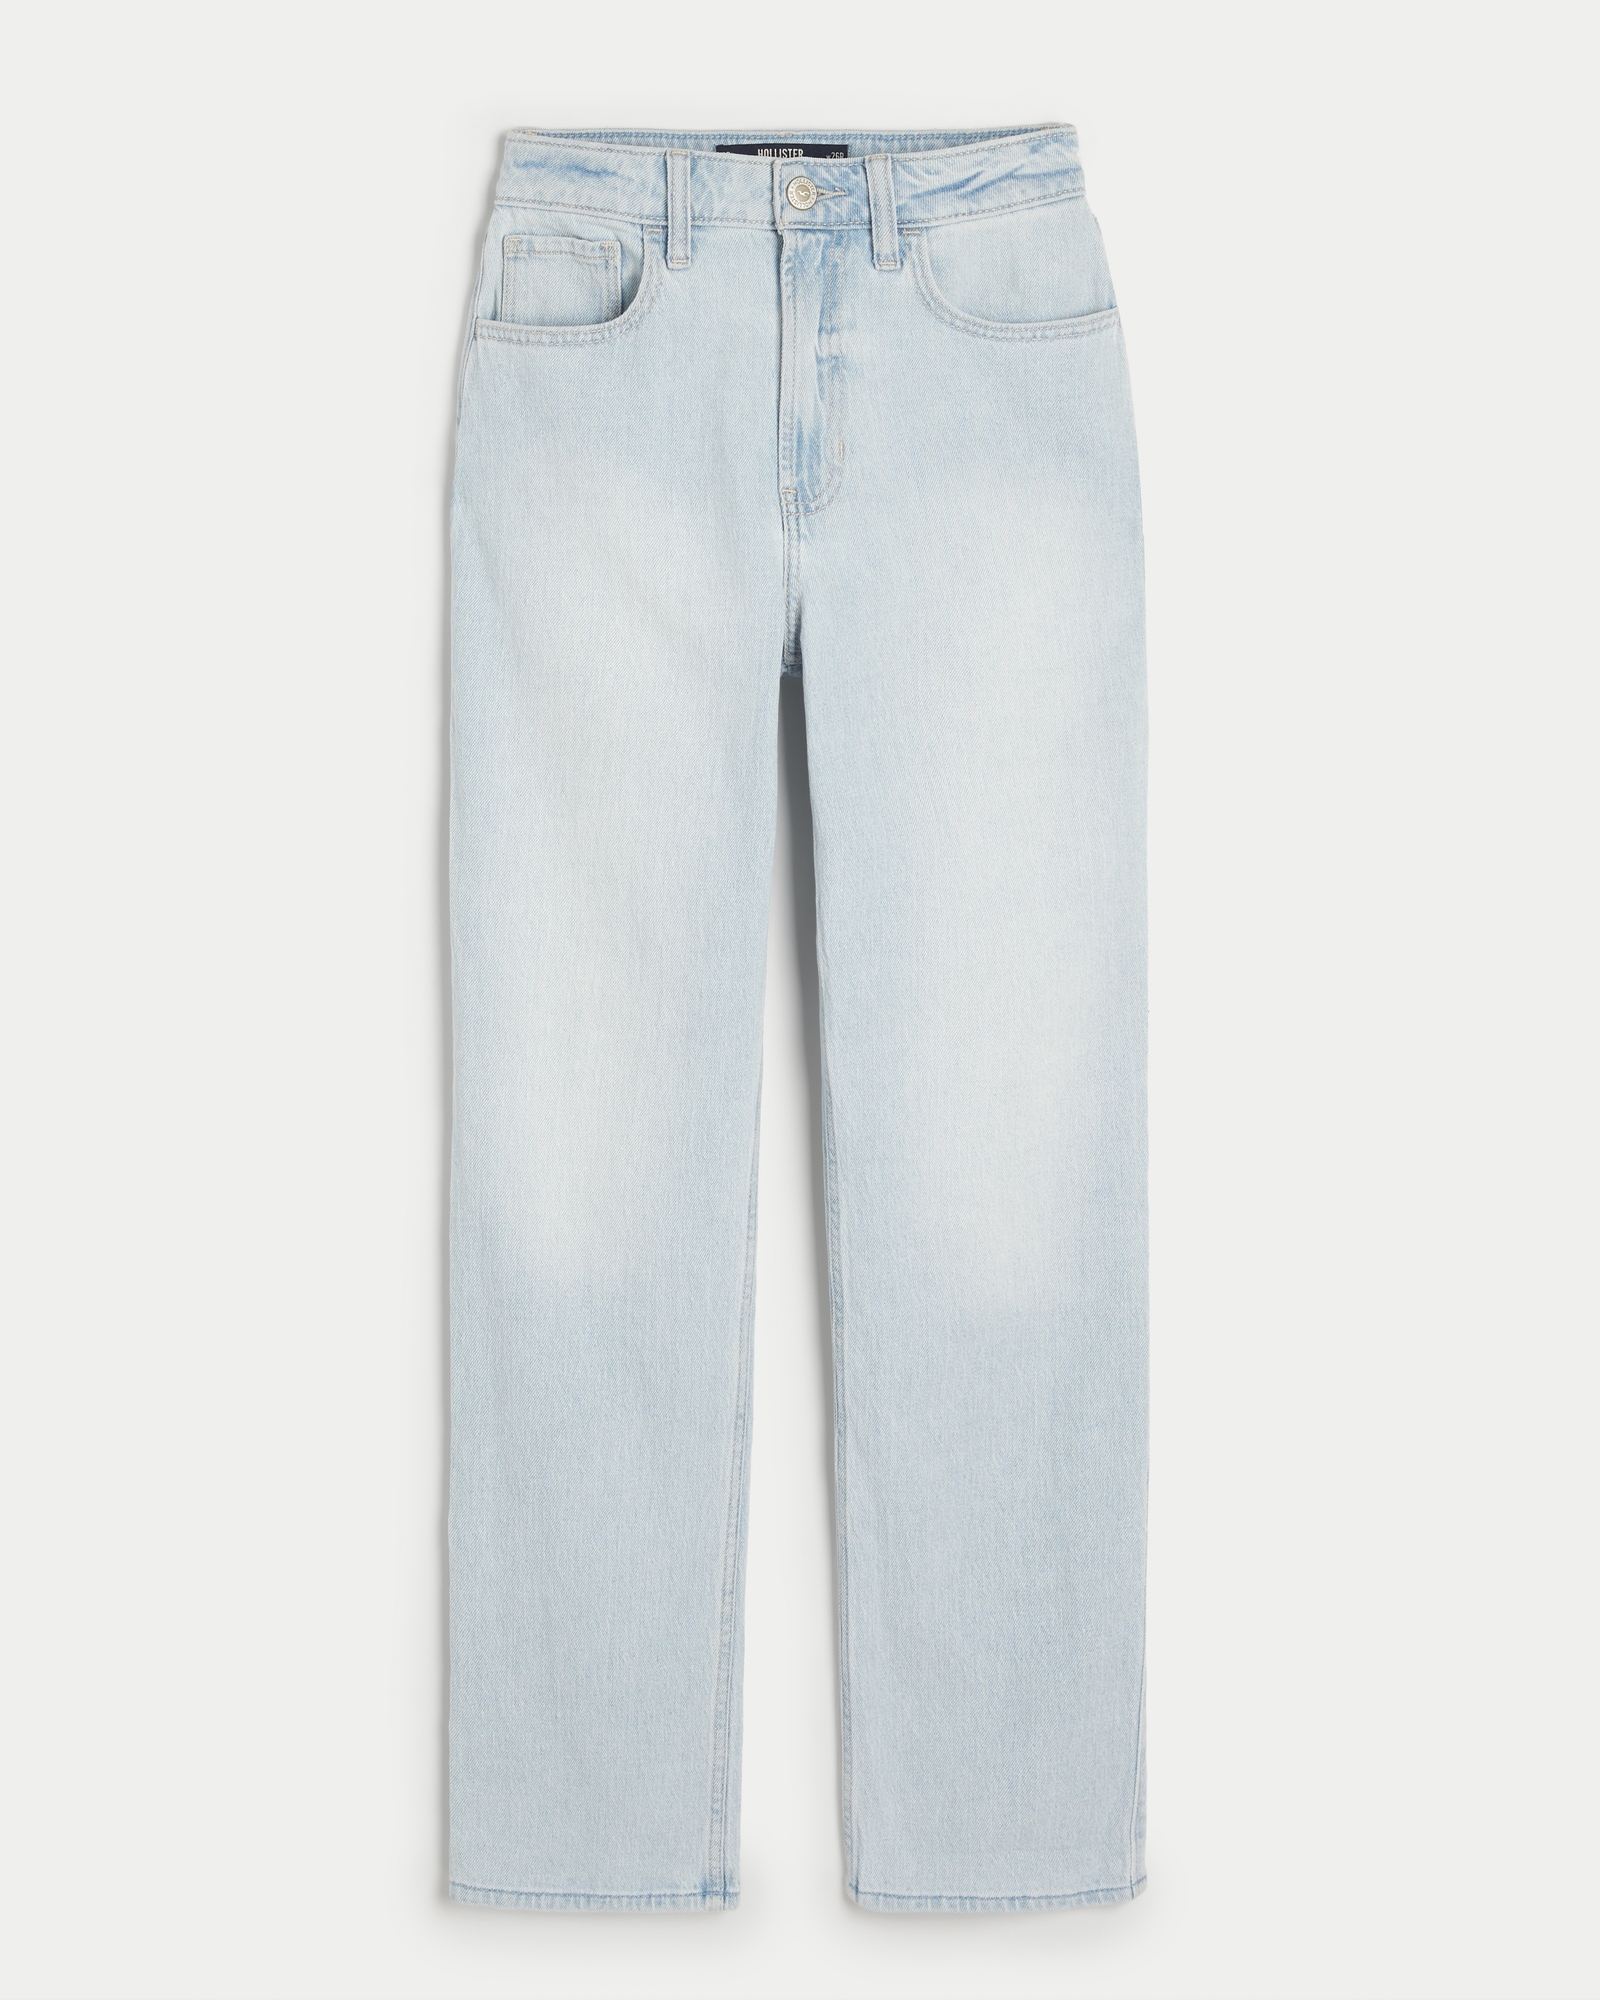 Hollister straight leg jeans in mid wash